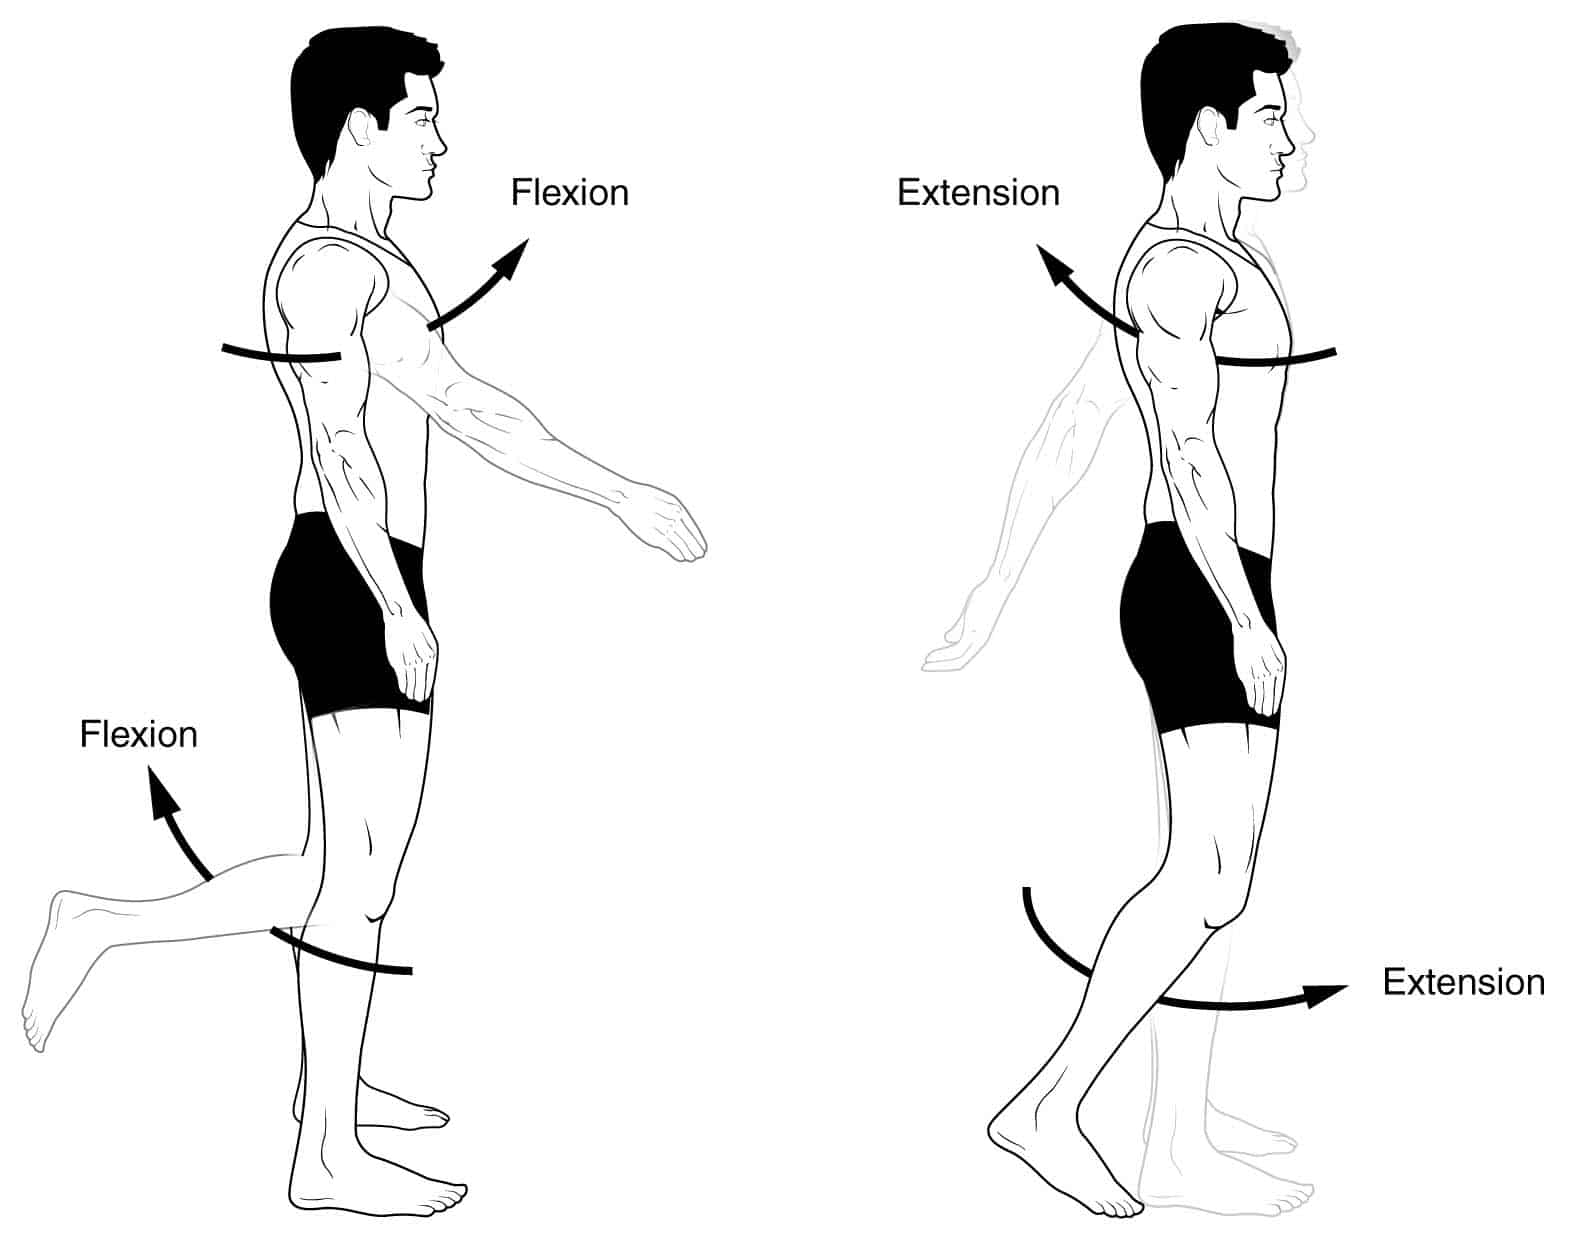 <p>Two end portions of an extremity are brought closer together</p><ul><li><p>Dorsiflexion</p><ul><li><p>A type of flexion movement where the toes point towards the shin</p></li></ul></li></ul>